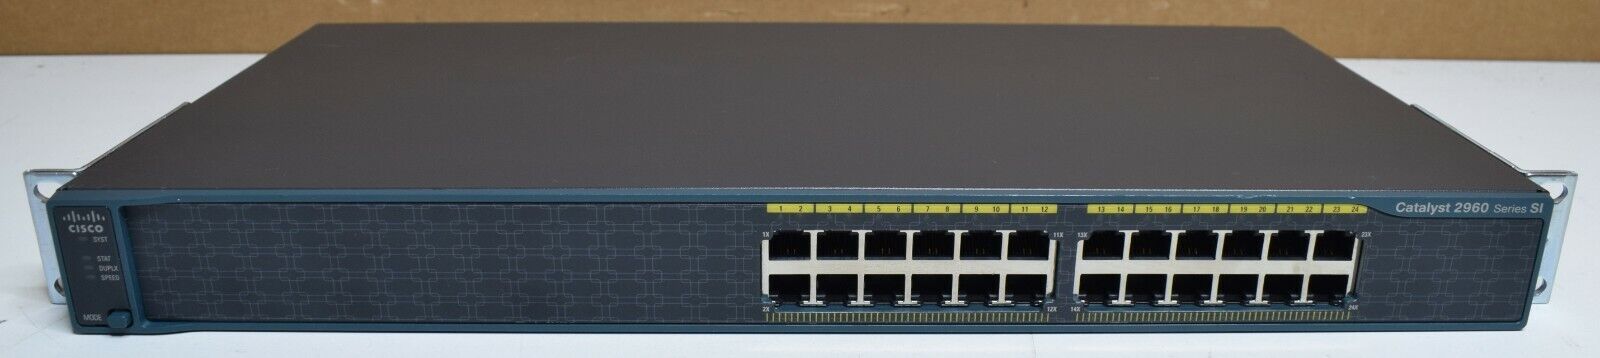 Cisco Catalyst 2960 SI WS-C2960-24-S V06 | 24 Port Fast Ethernet Managed Switch